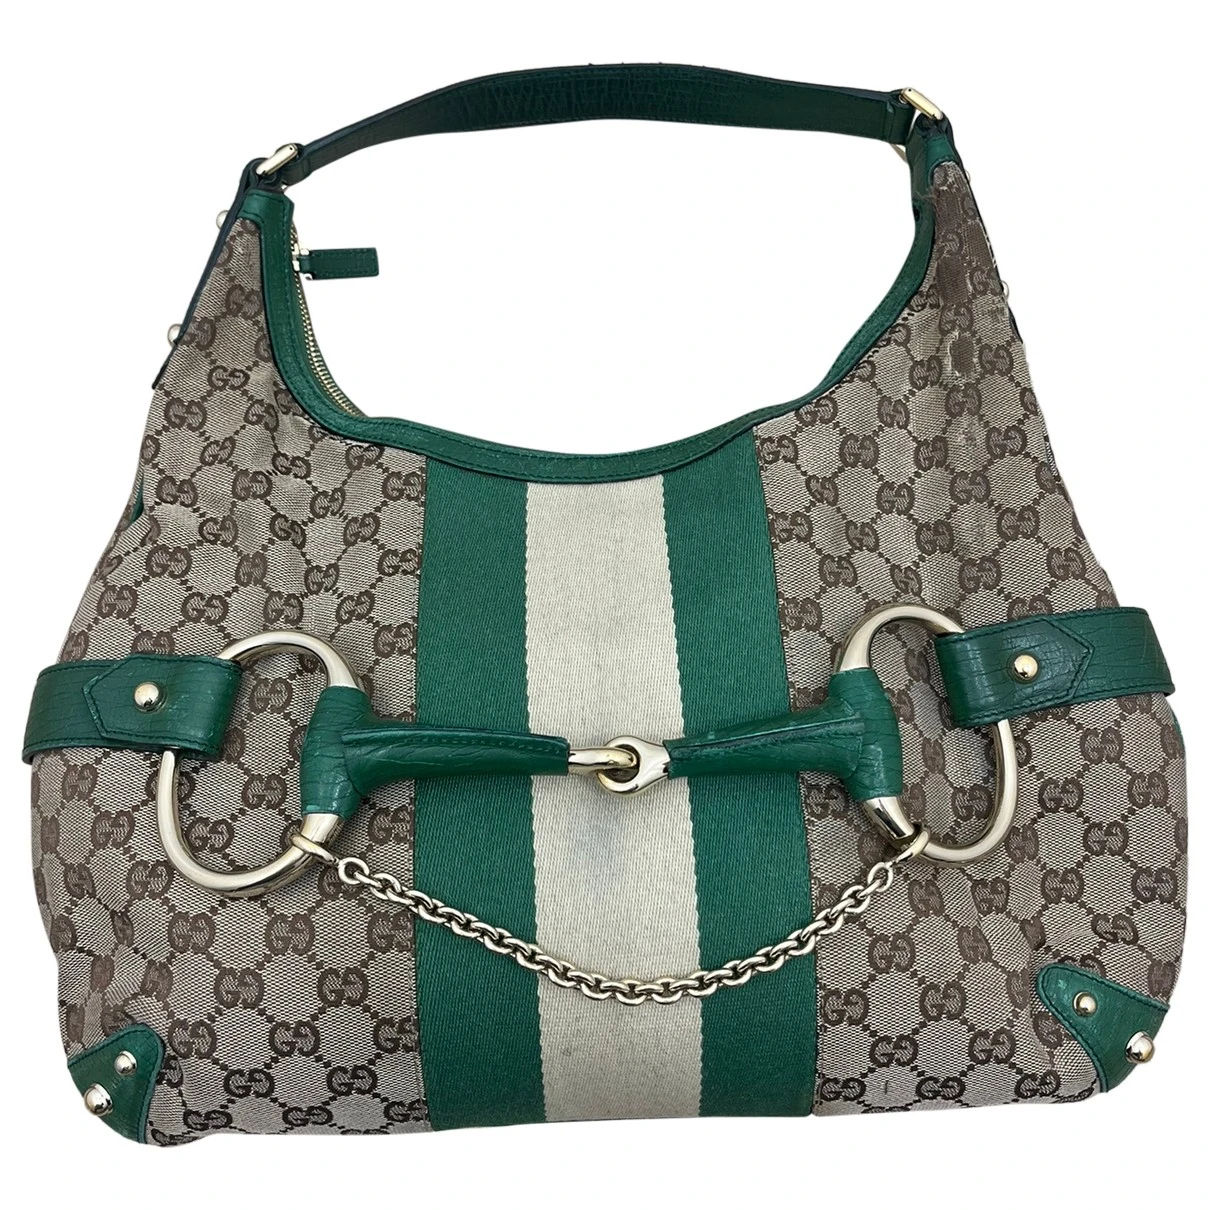 bags Gucci handbags Dionysus Hobo for Female Cloth. Used condition